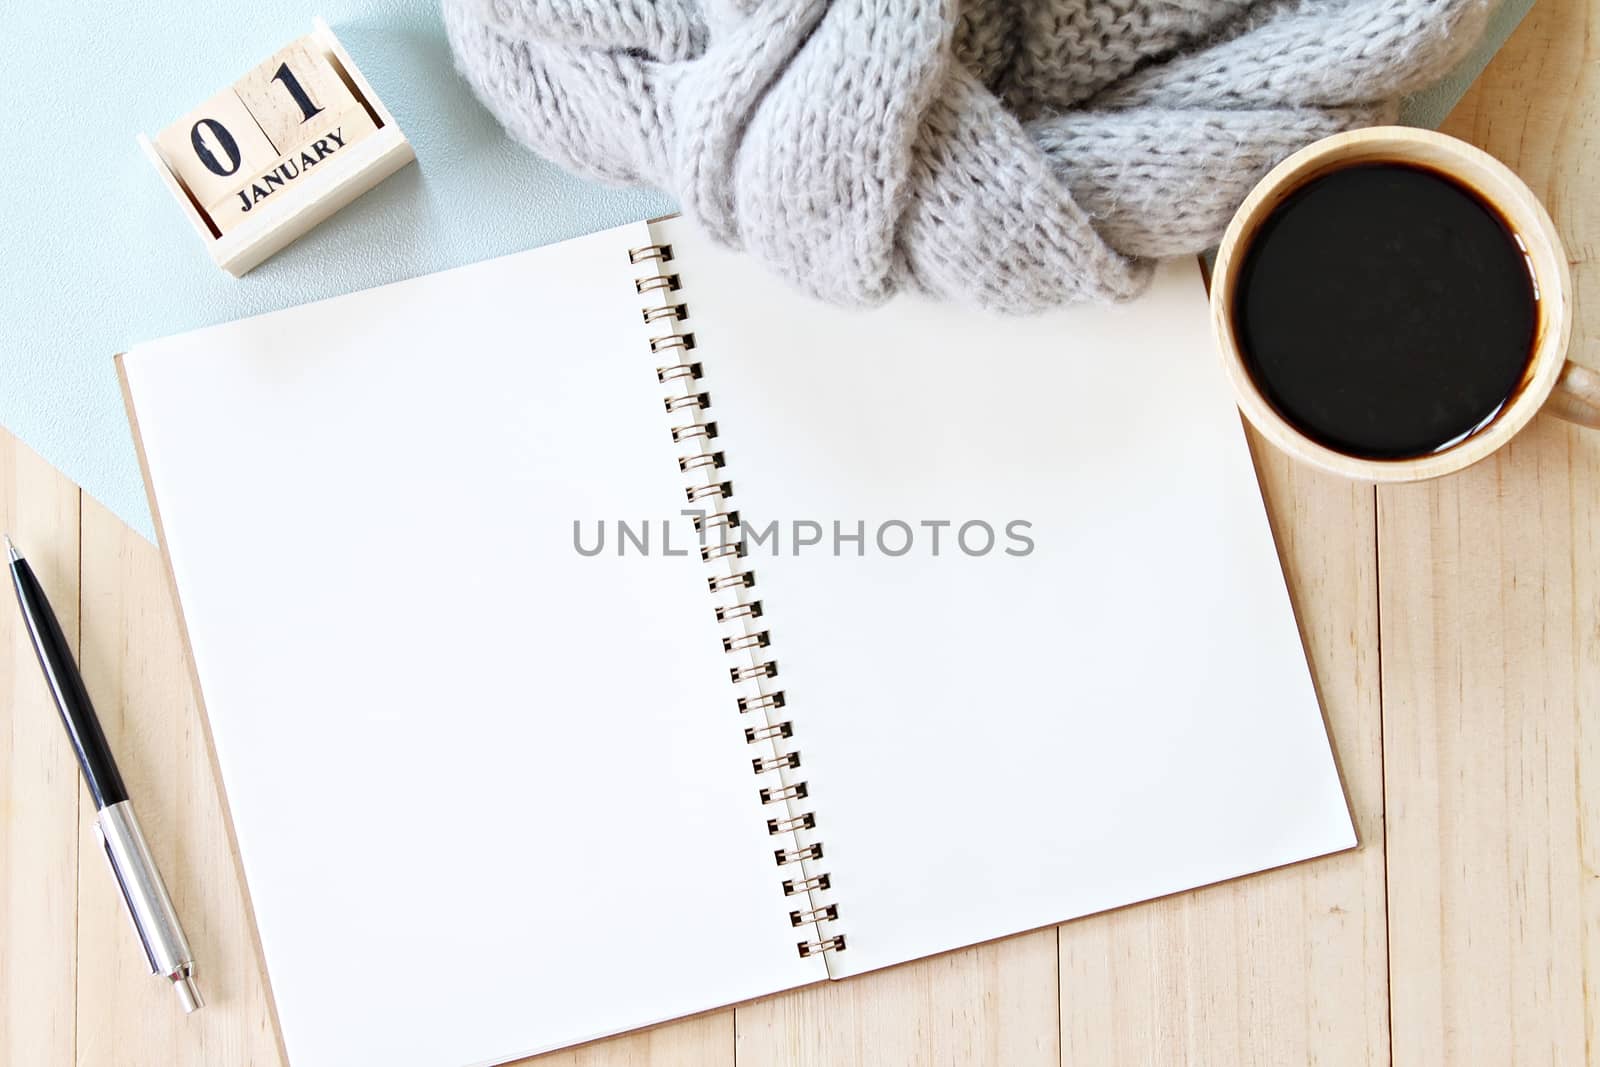 Business, weekend, holiday or new year planning concept : Flat lay or top view of gray knitted scarf, open blank notebook paper, coffee cup and new year cube calendar on wooden background